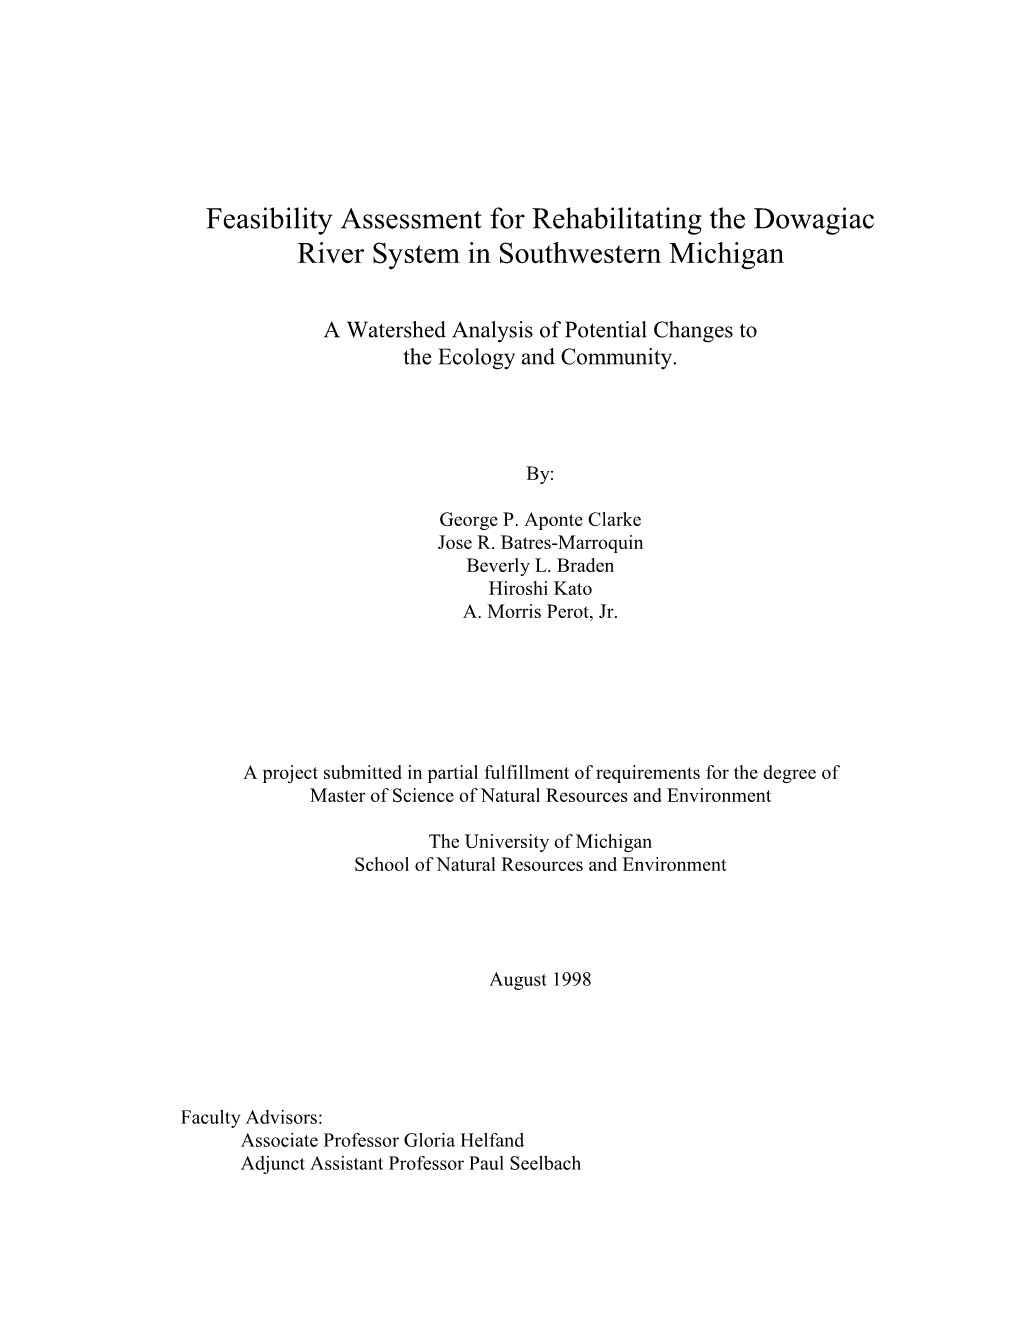 Feasibility Assessment for Rehabilitating the Dowagiac River System in Southwestern Michigan